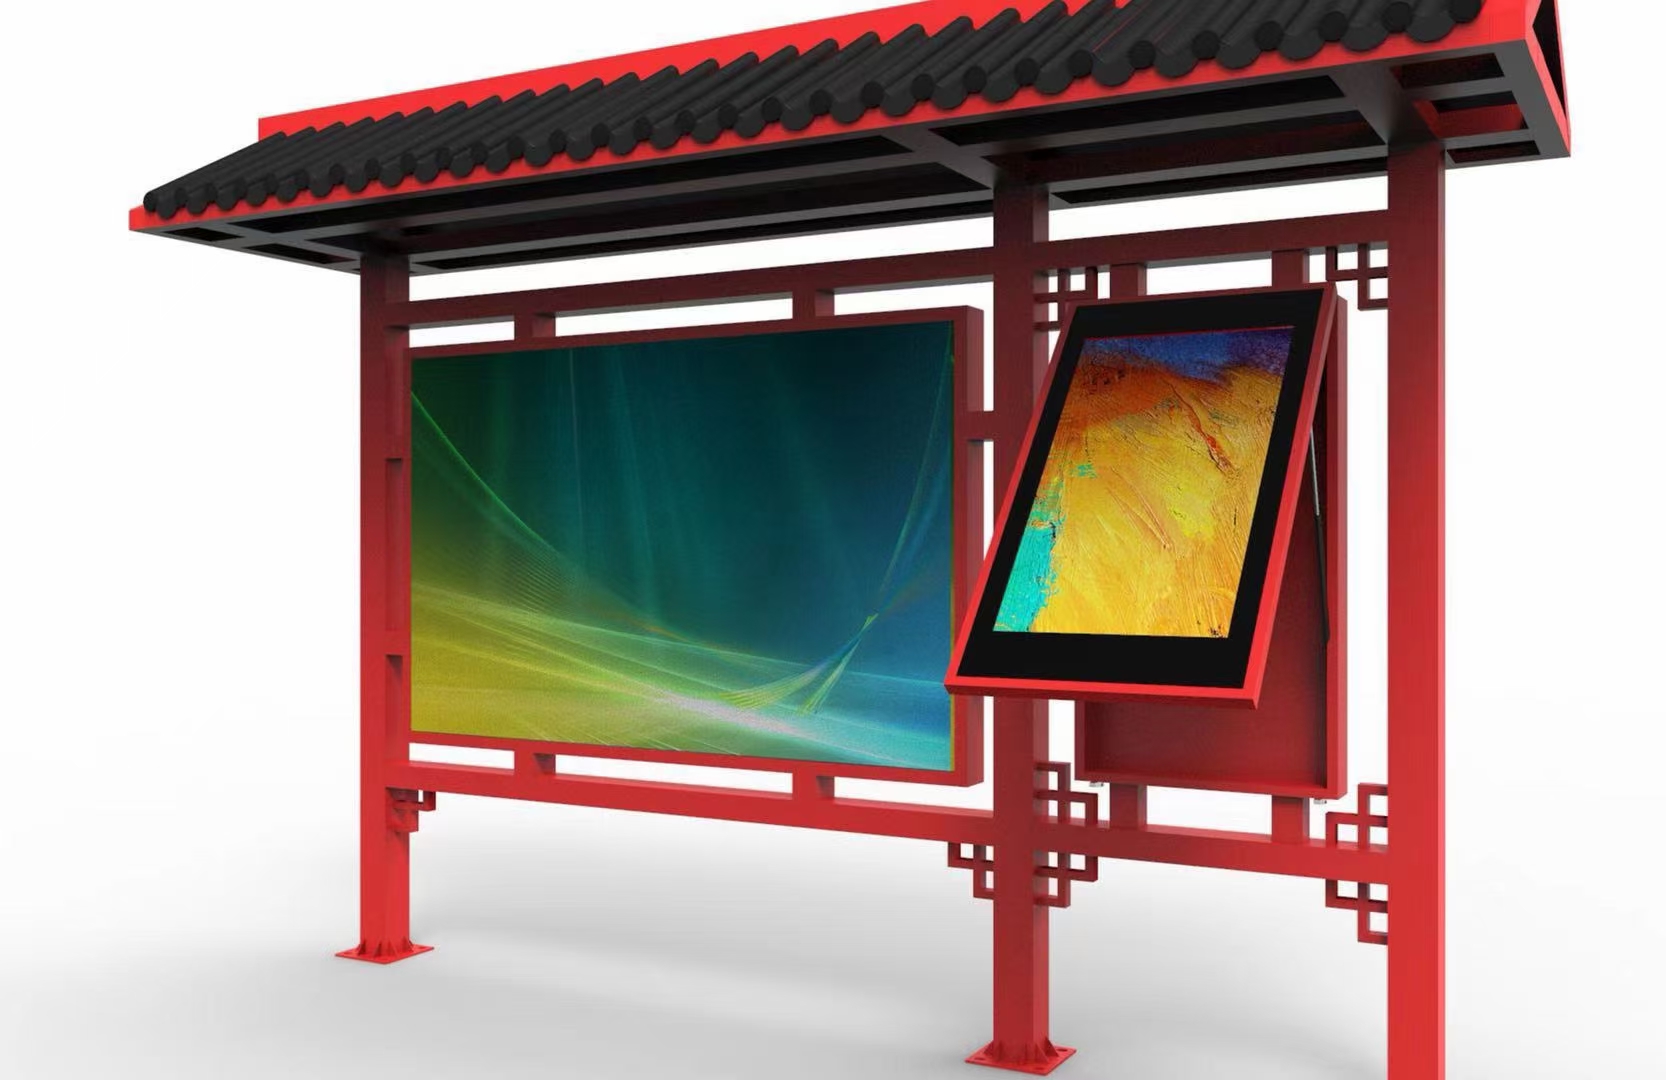 The Difference Between Indoor Digital Signage and Outdoor Digital Signage